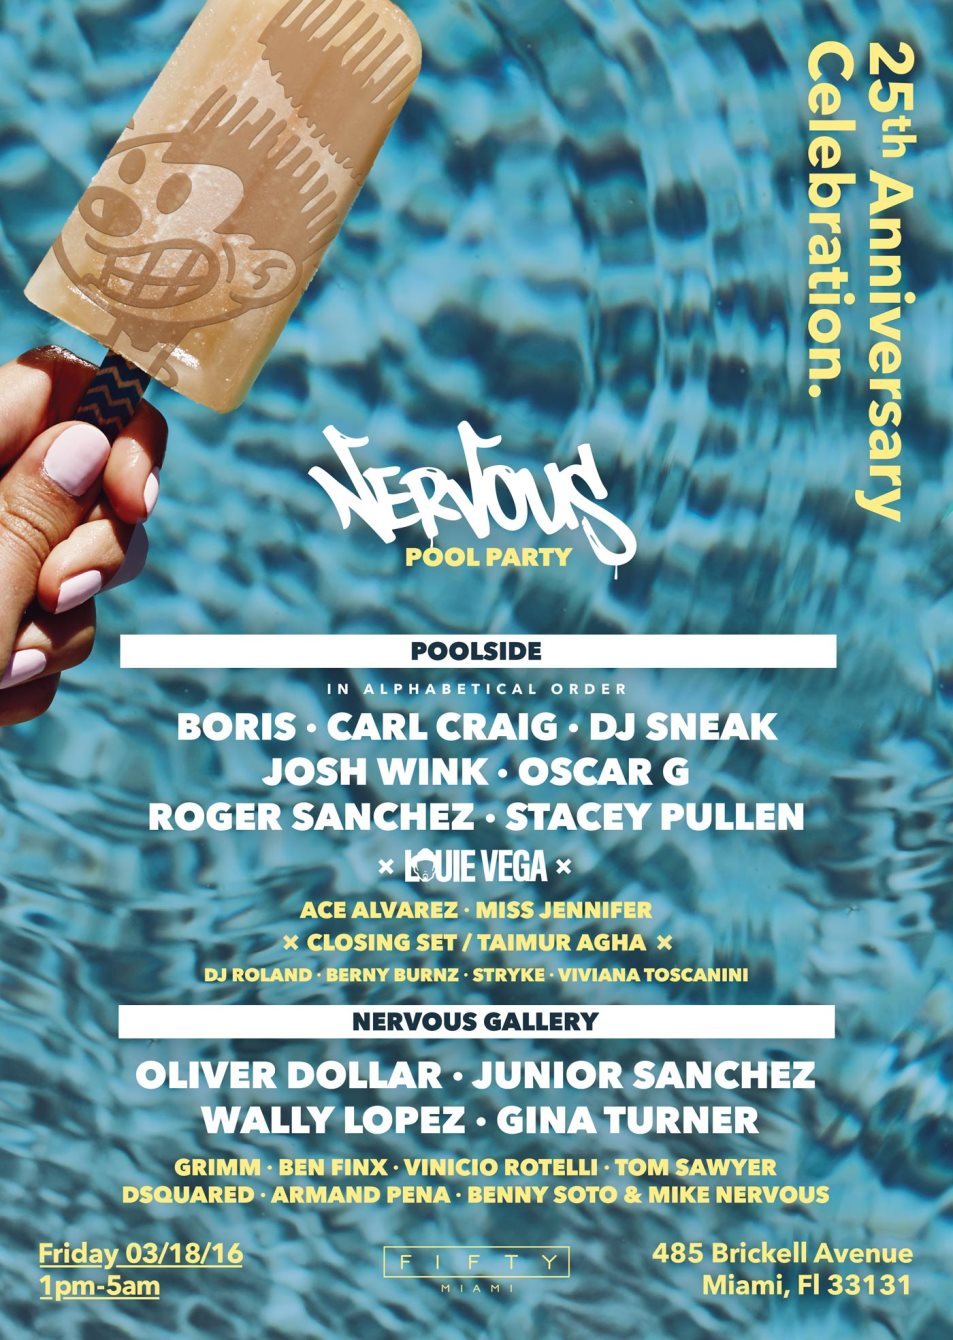 The Nervous Pool Party - 25 Year Anniversary Bash - Flyer front